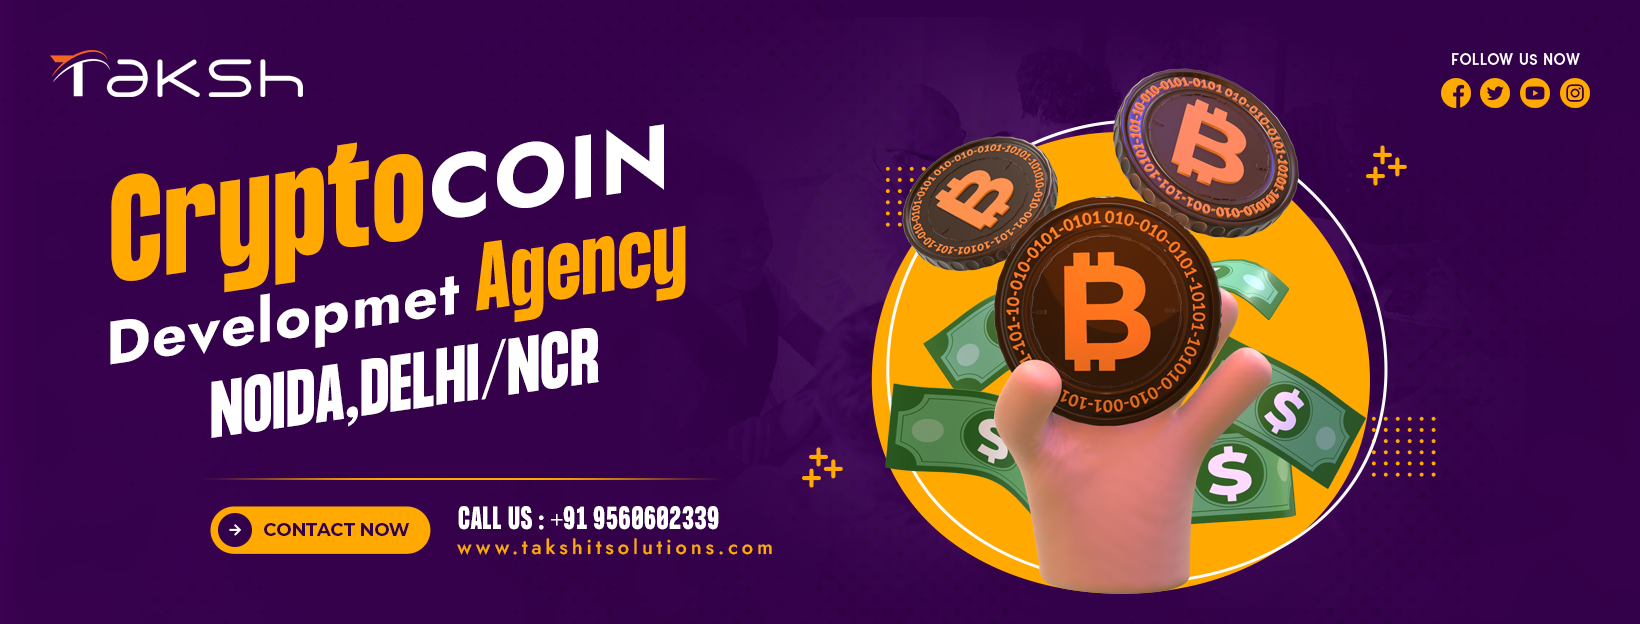 Crypto Coin Development Company || Taksh It Solutions Private Limited